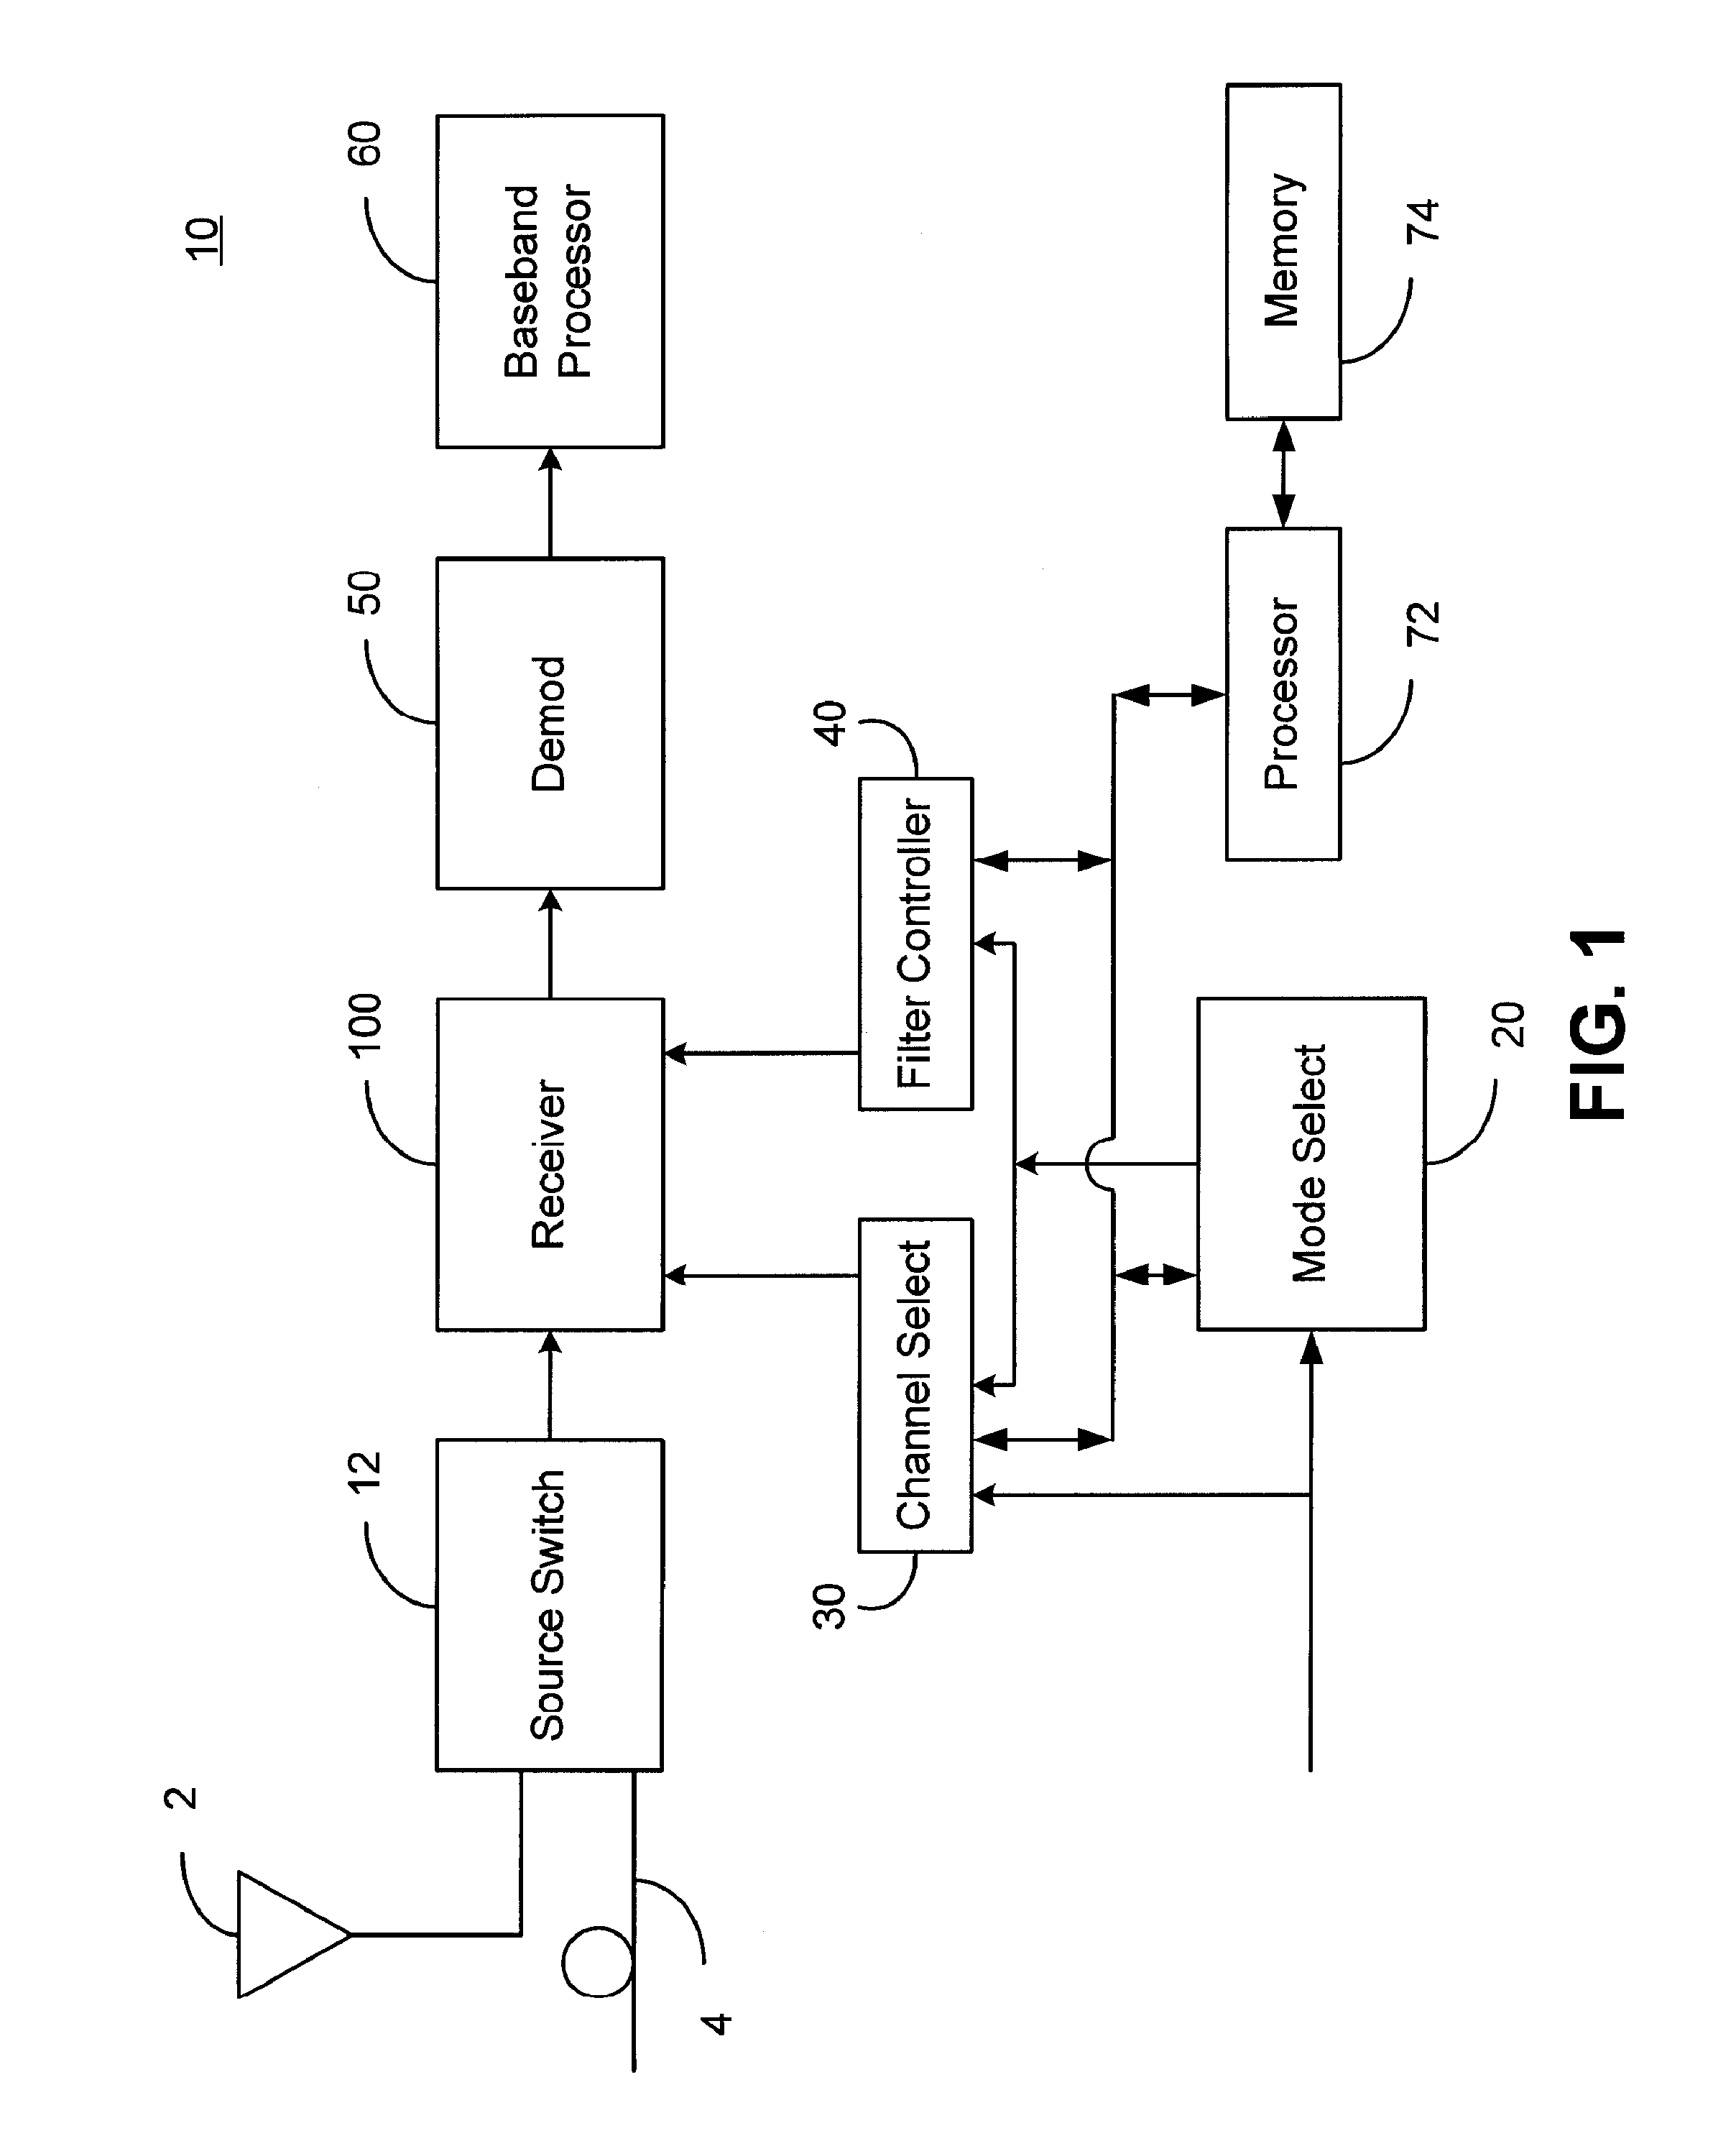 Method and Apparatus for Calibrating the Sideband Rejection of a Receiver